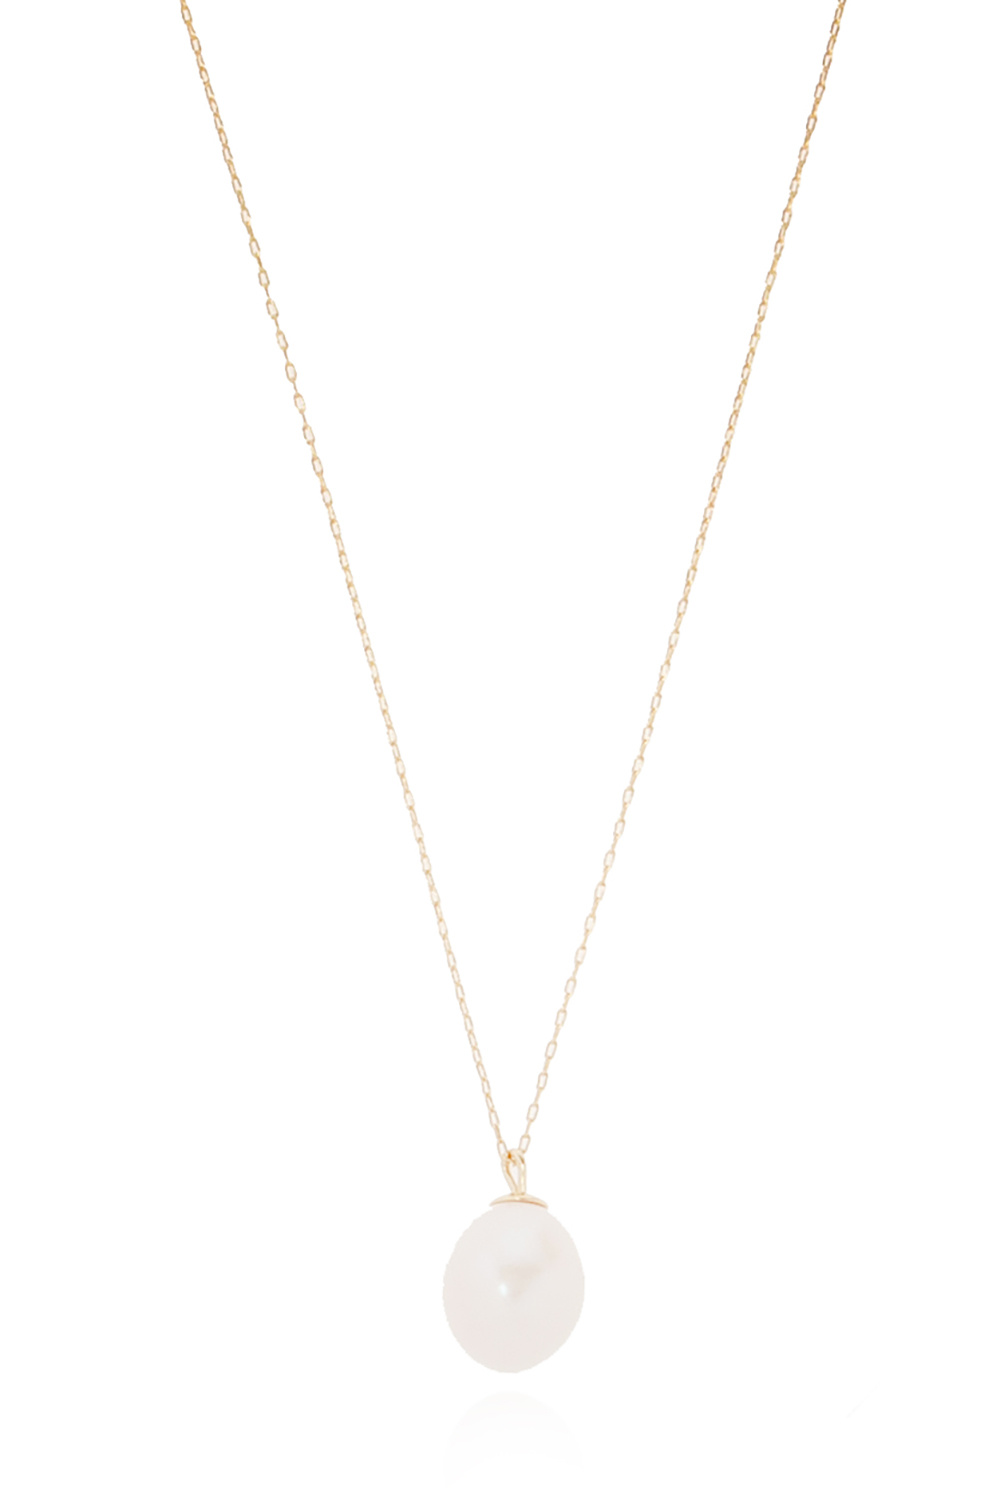 Kate Spade ‘Pearl Play’ necklace